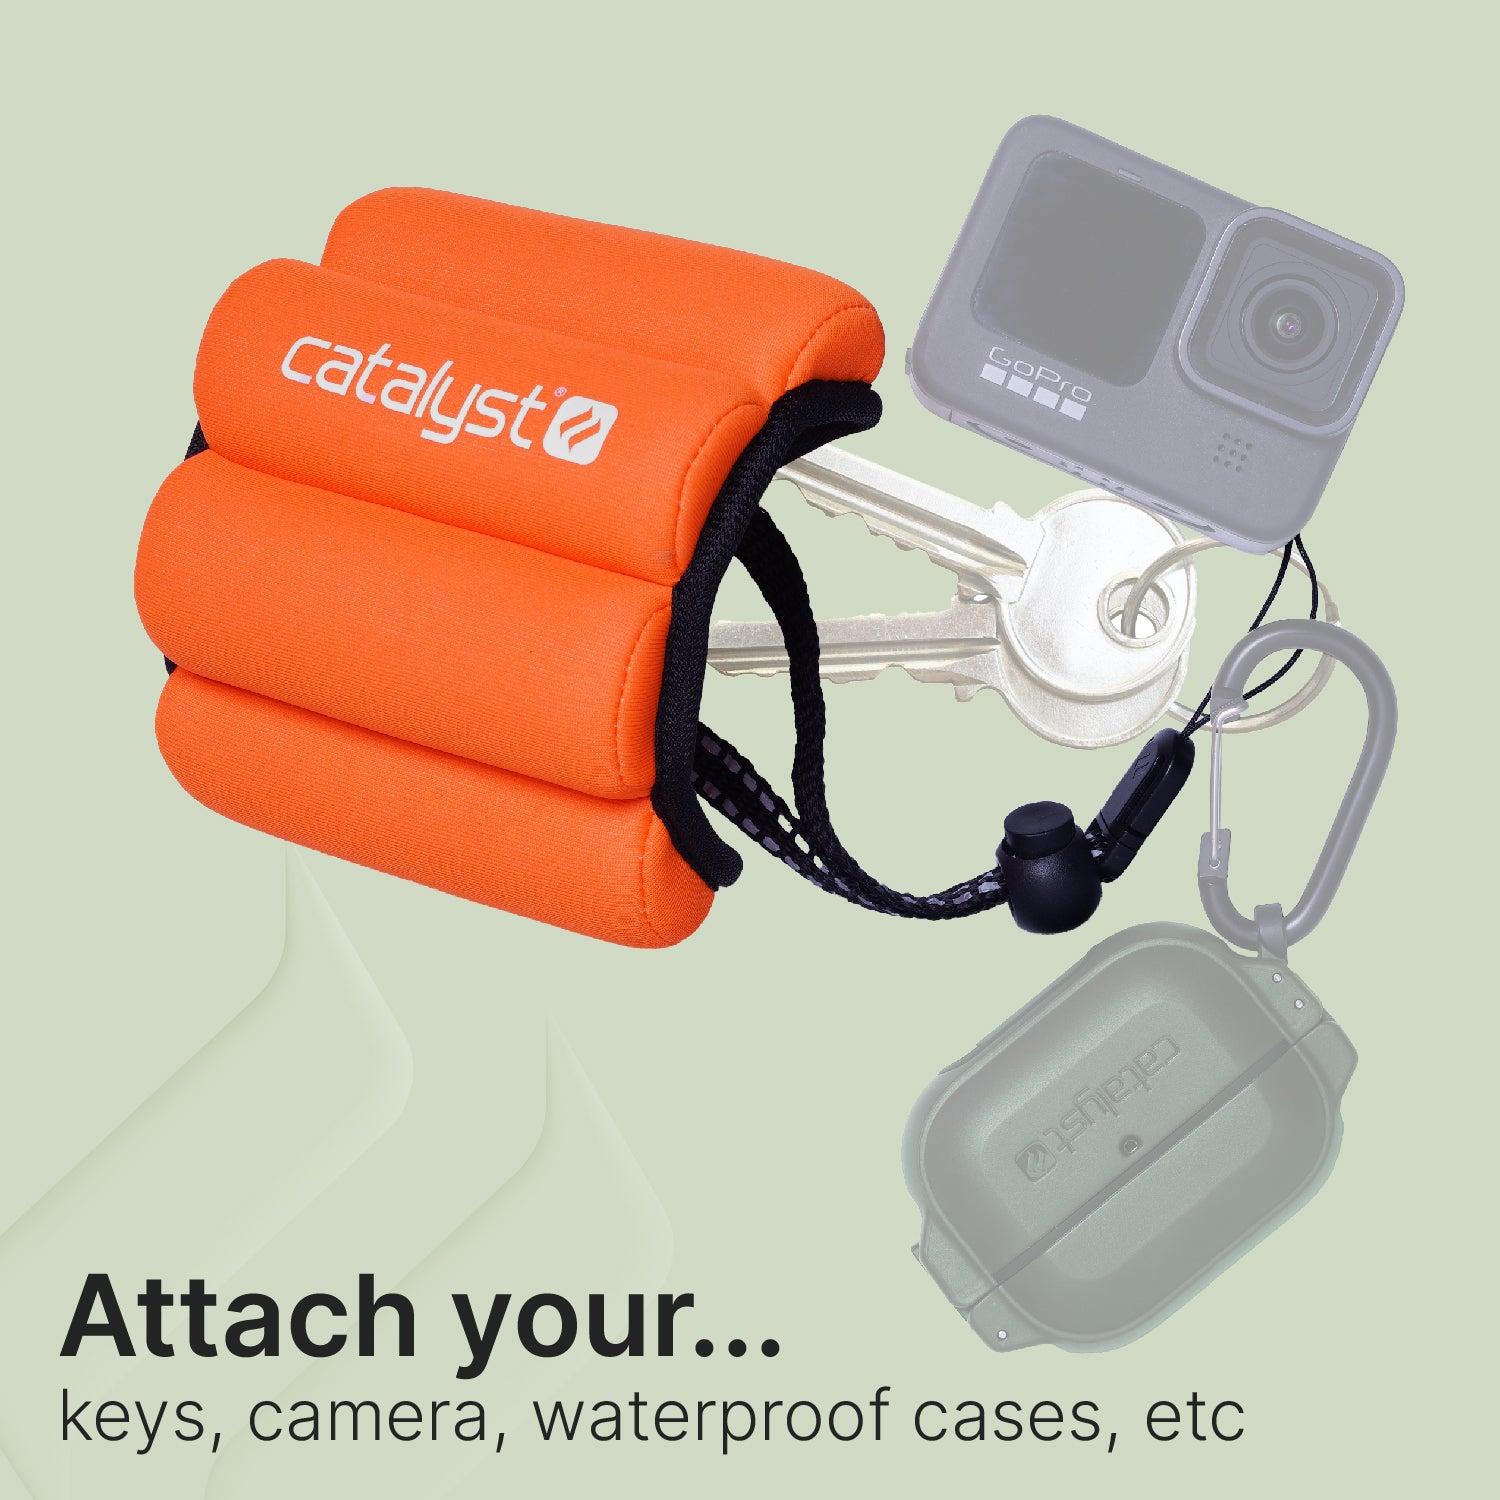 Catalyst Orange Wrist Floating Lanyard attached to your keys AirPods Pro case camera GoPro